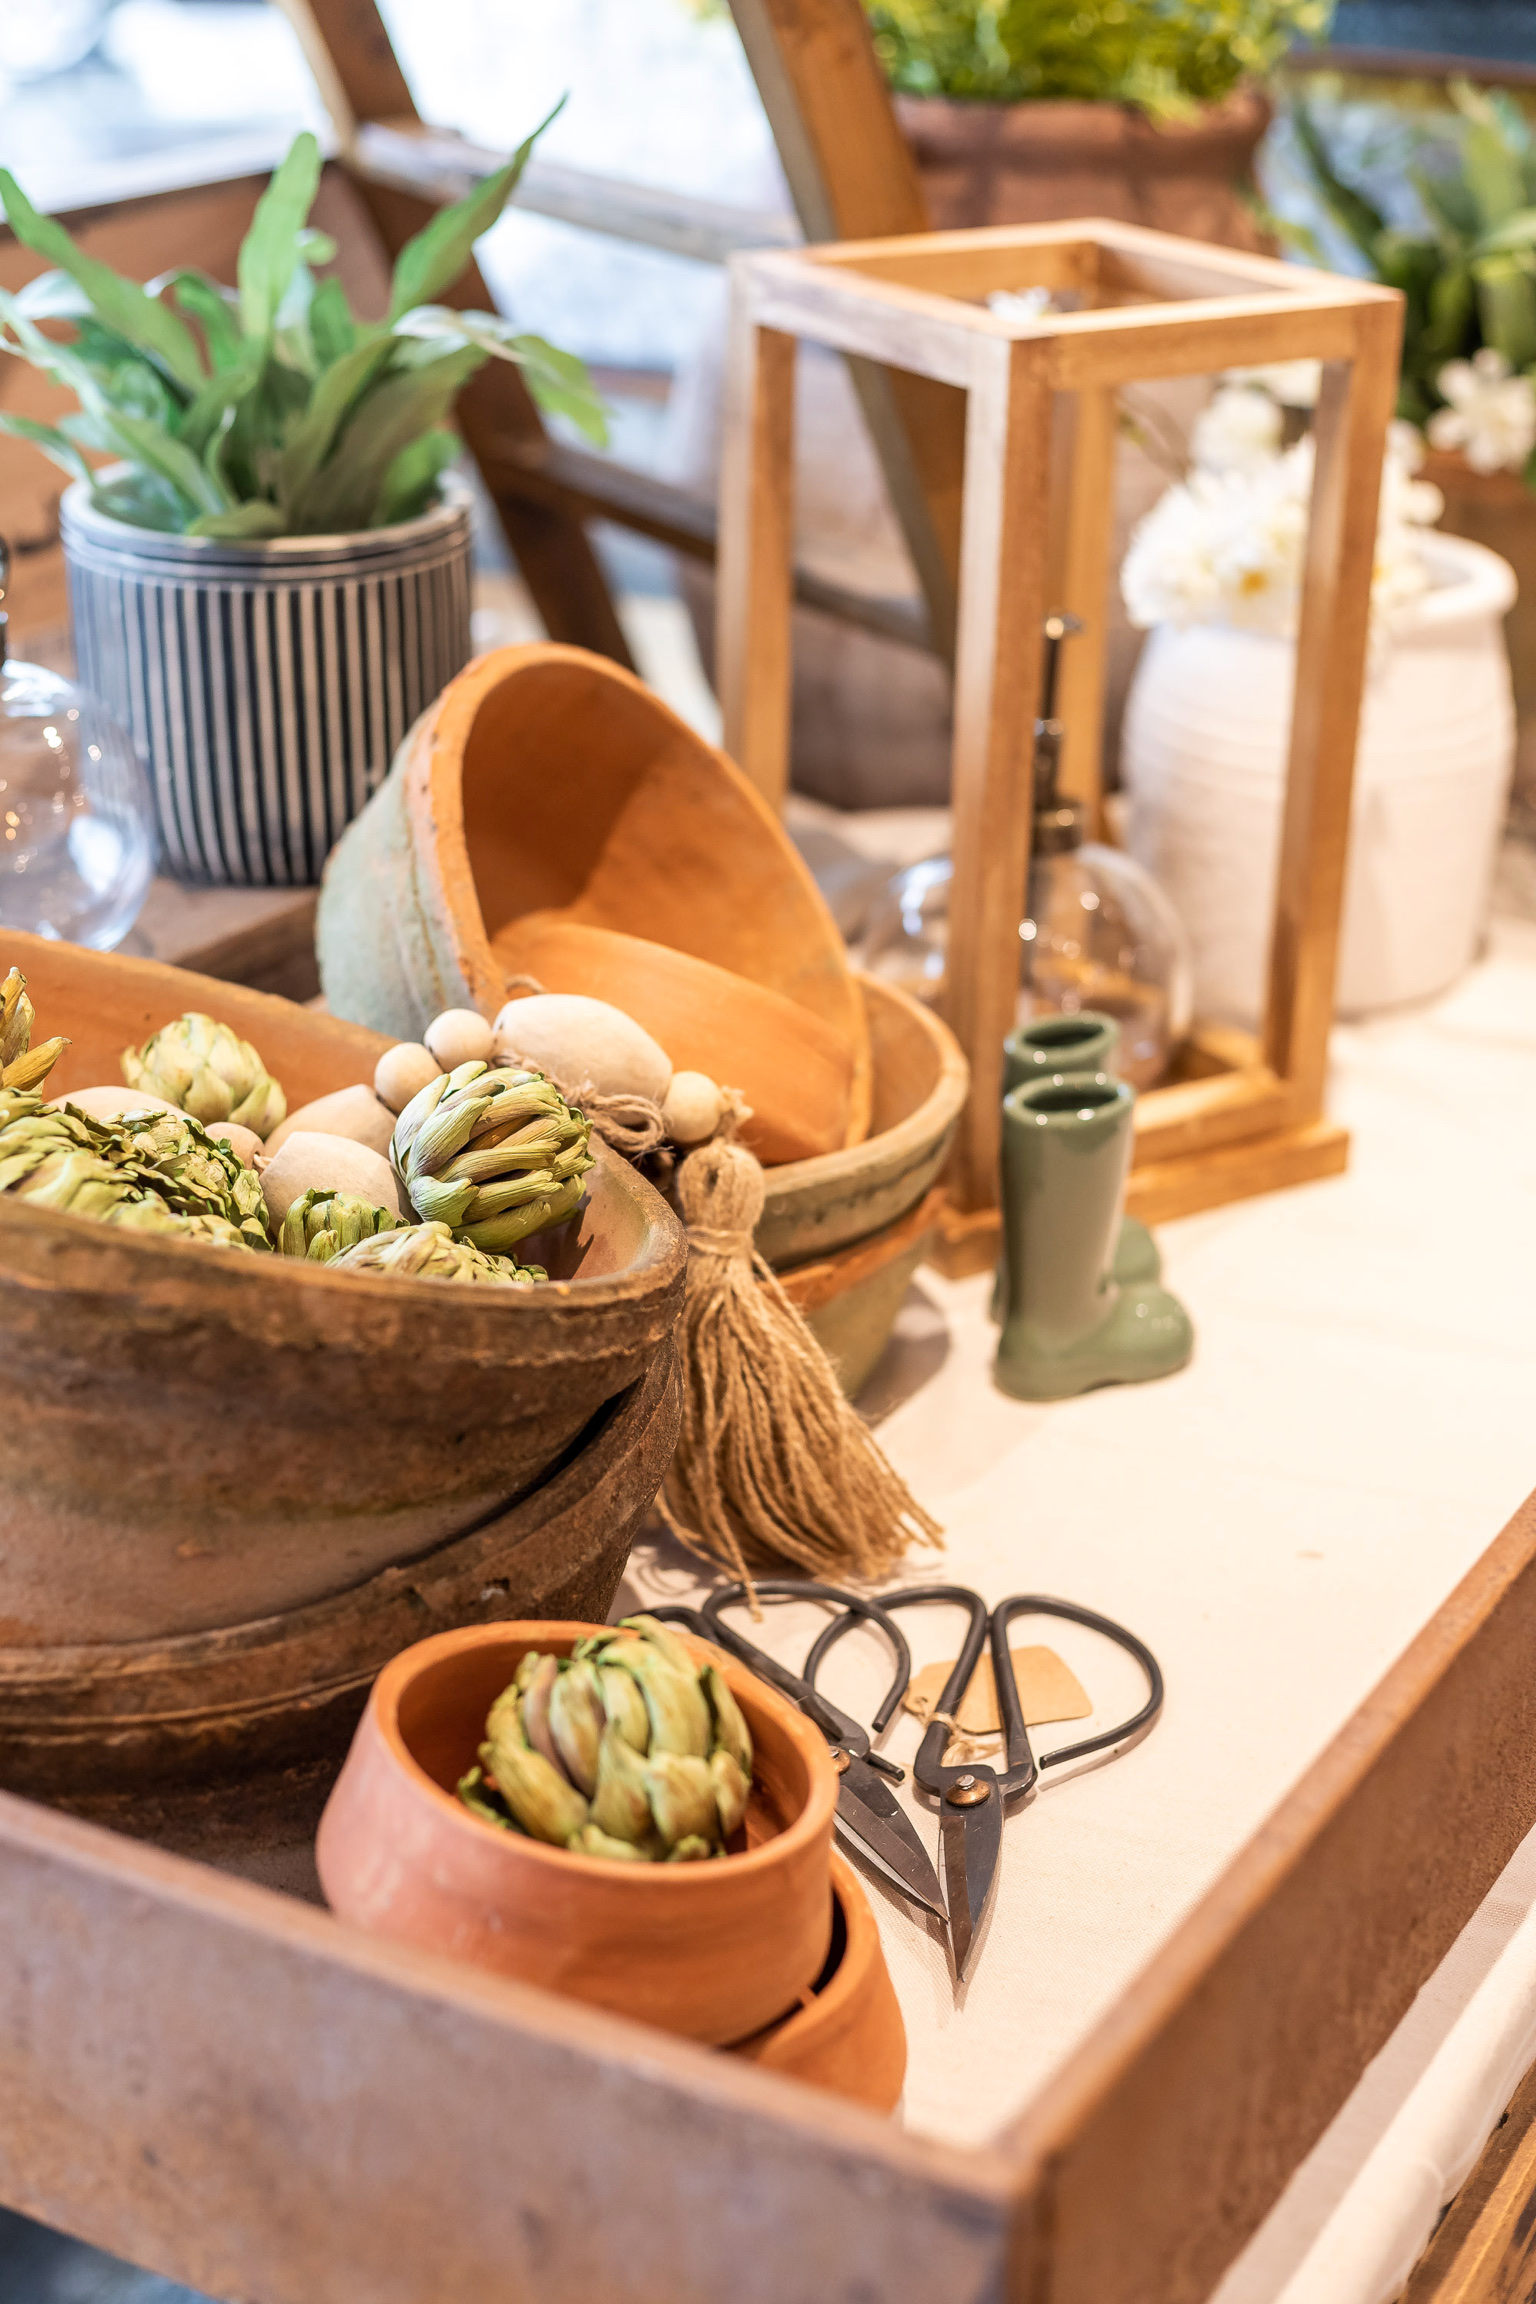 Natural home decor, gifts, and greenery